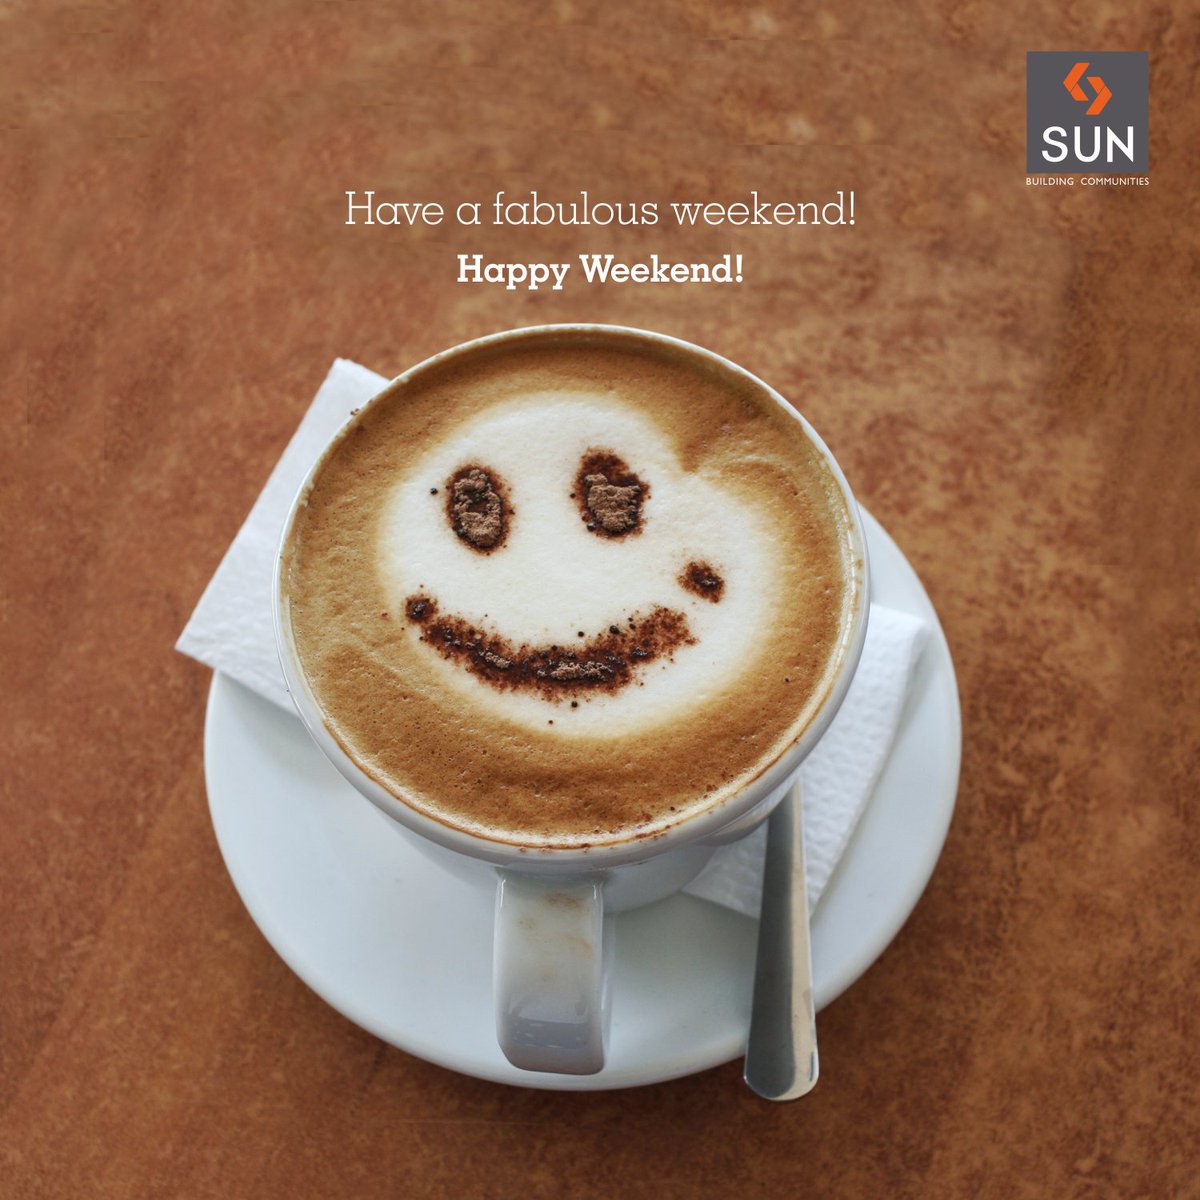 Weekend - A word that makes the curve of your smile bigger is here. Wishing you all a fun filled #weekend! https://t.co/lcRneN5y3A